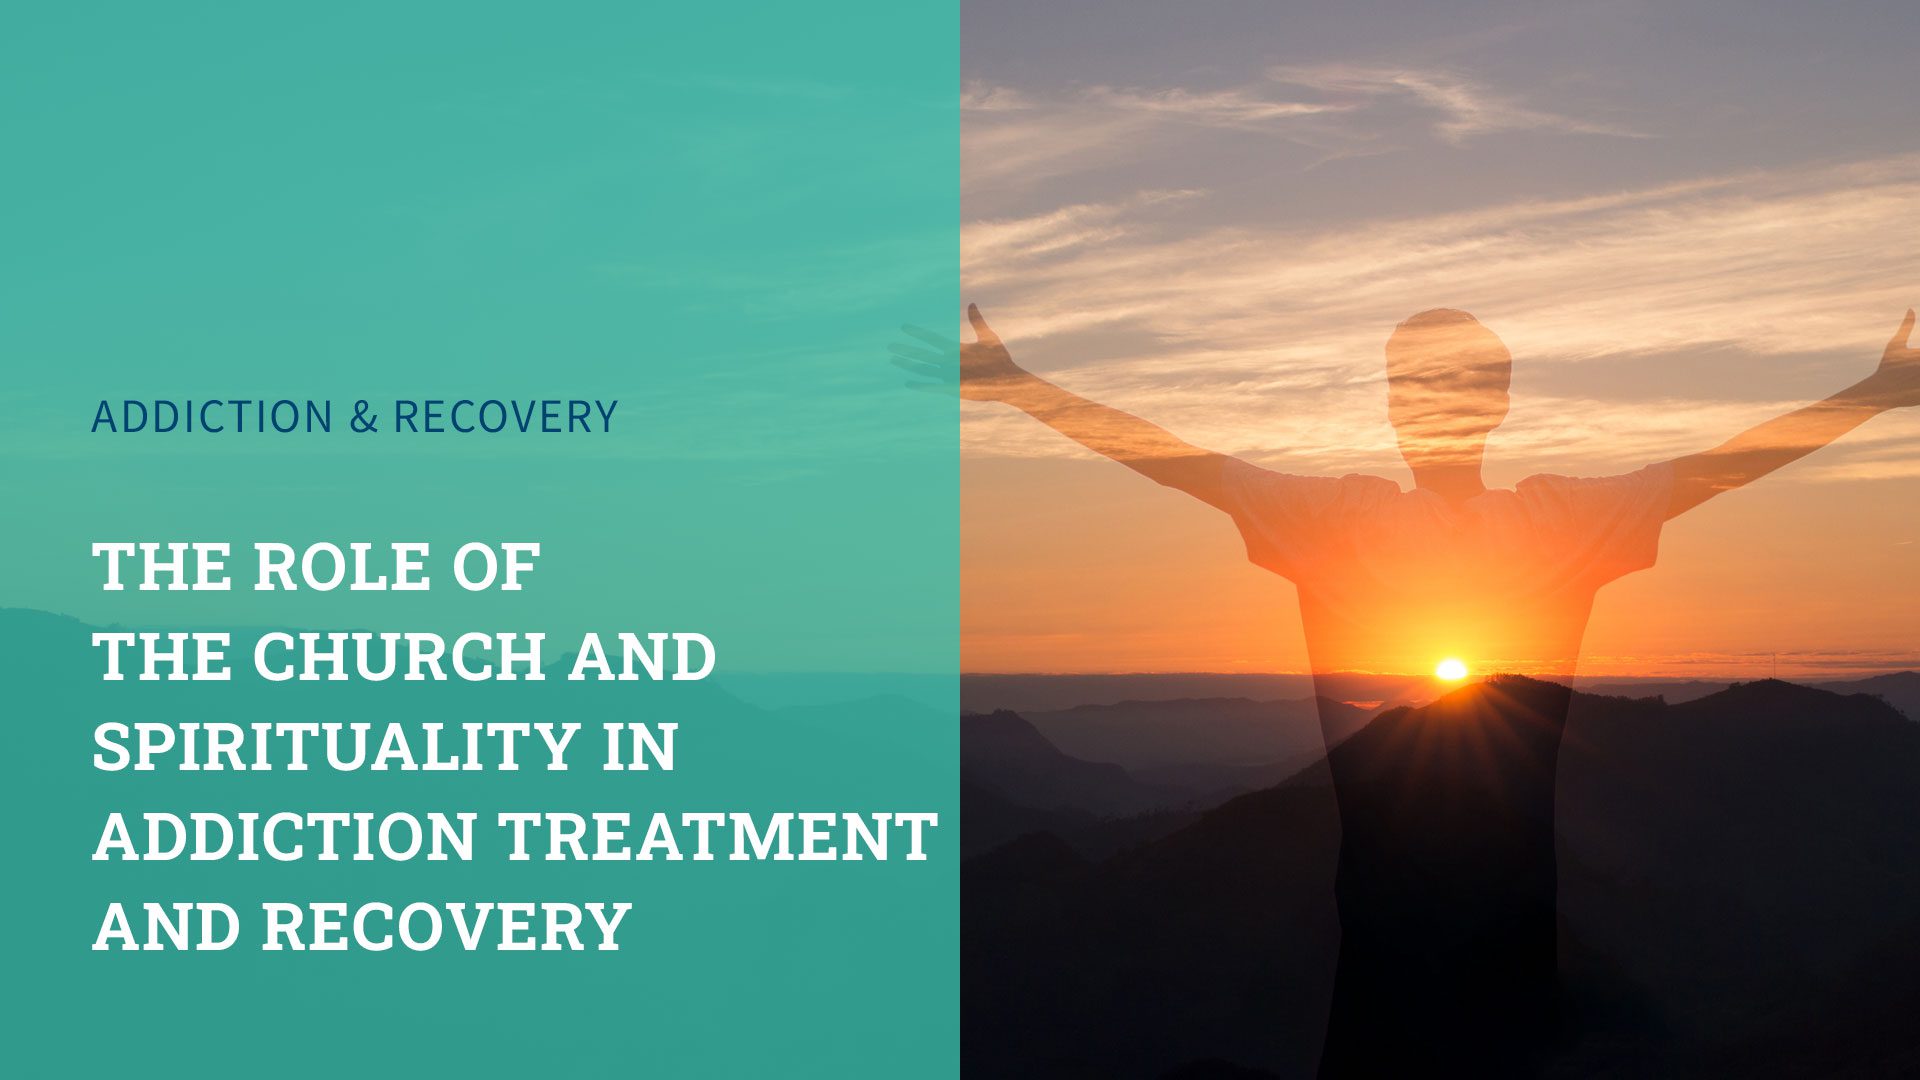 The Role of The Church and Spirituality in Addiction Treatment and Recovery